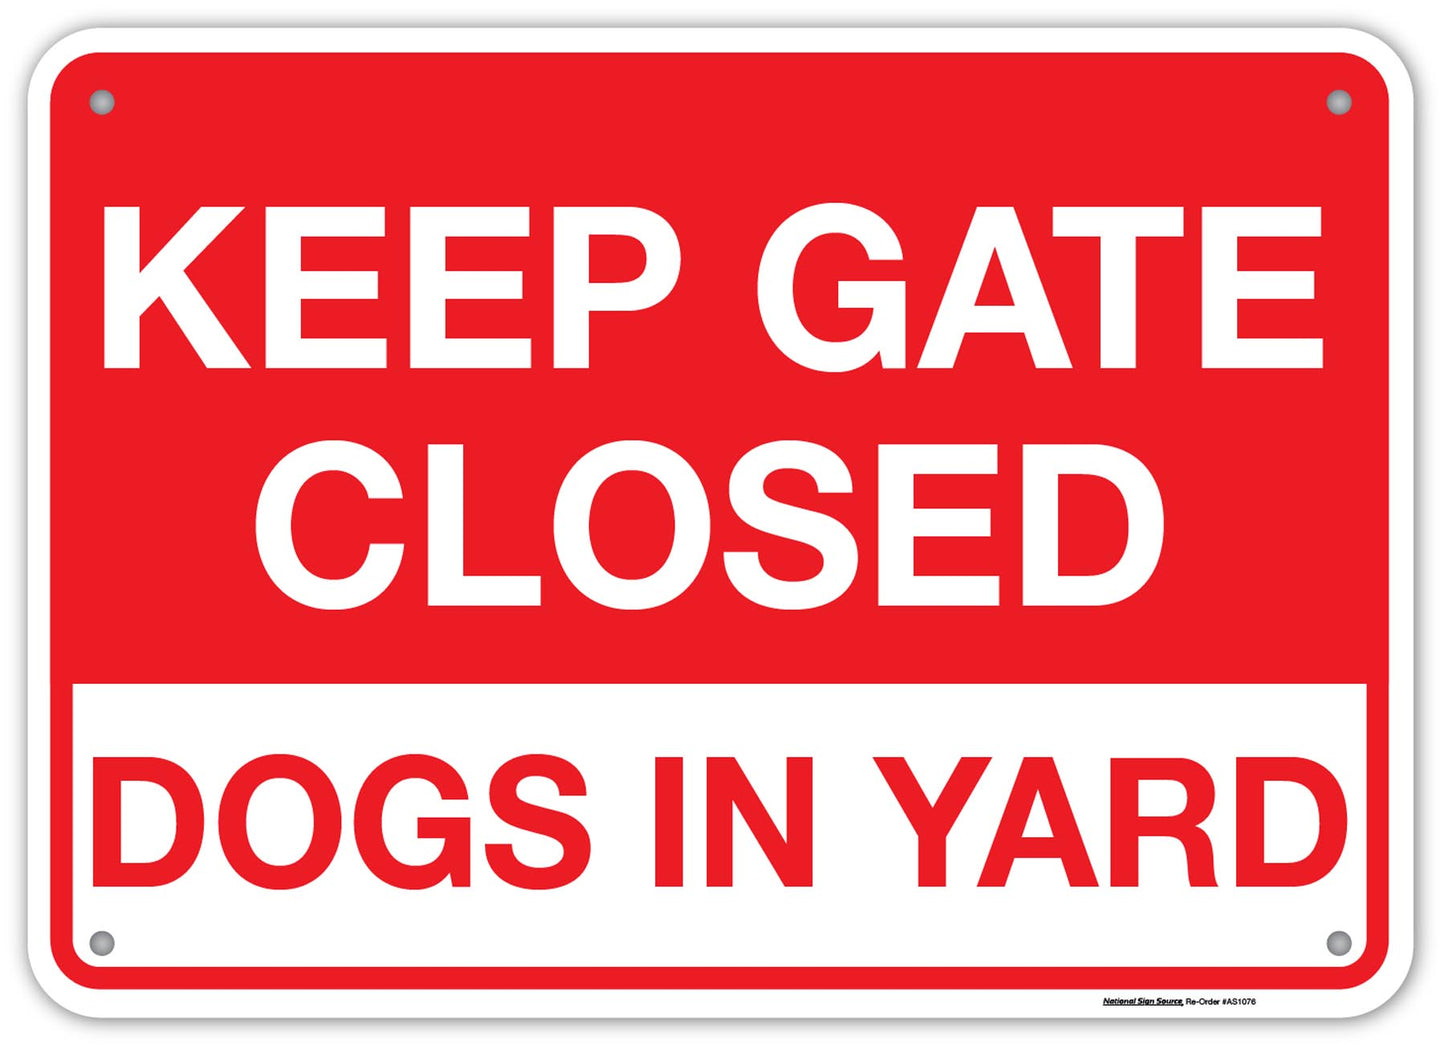 Keep Gate Closed Dogs In Yard Sign. Aluminum sign or Vinyl Decal. 